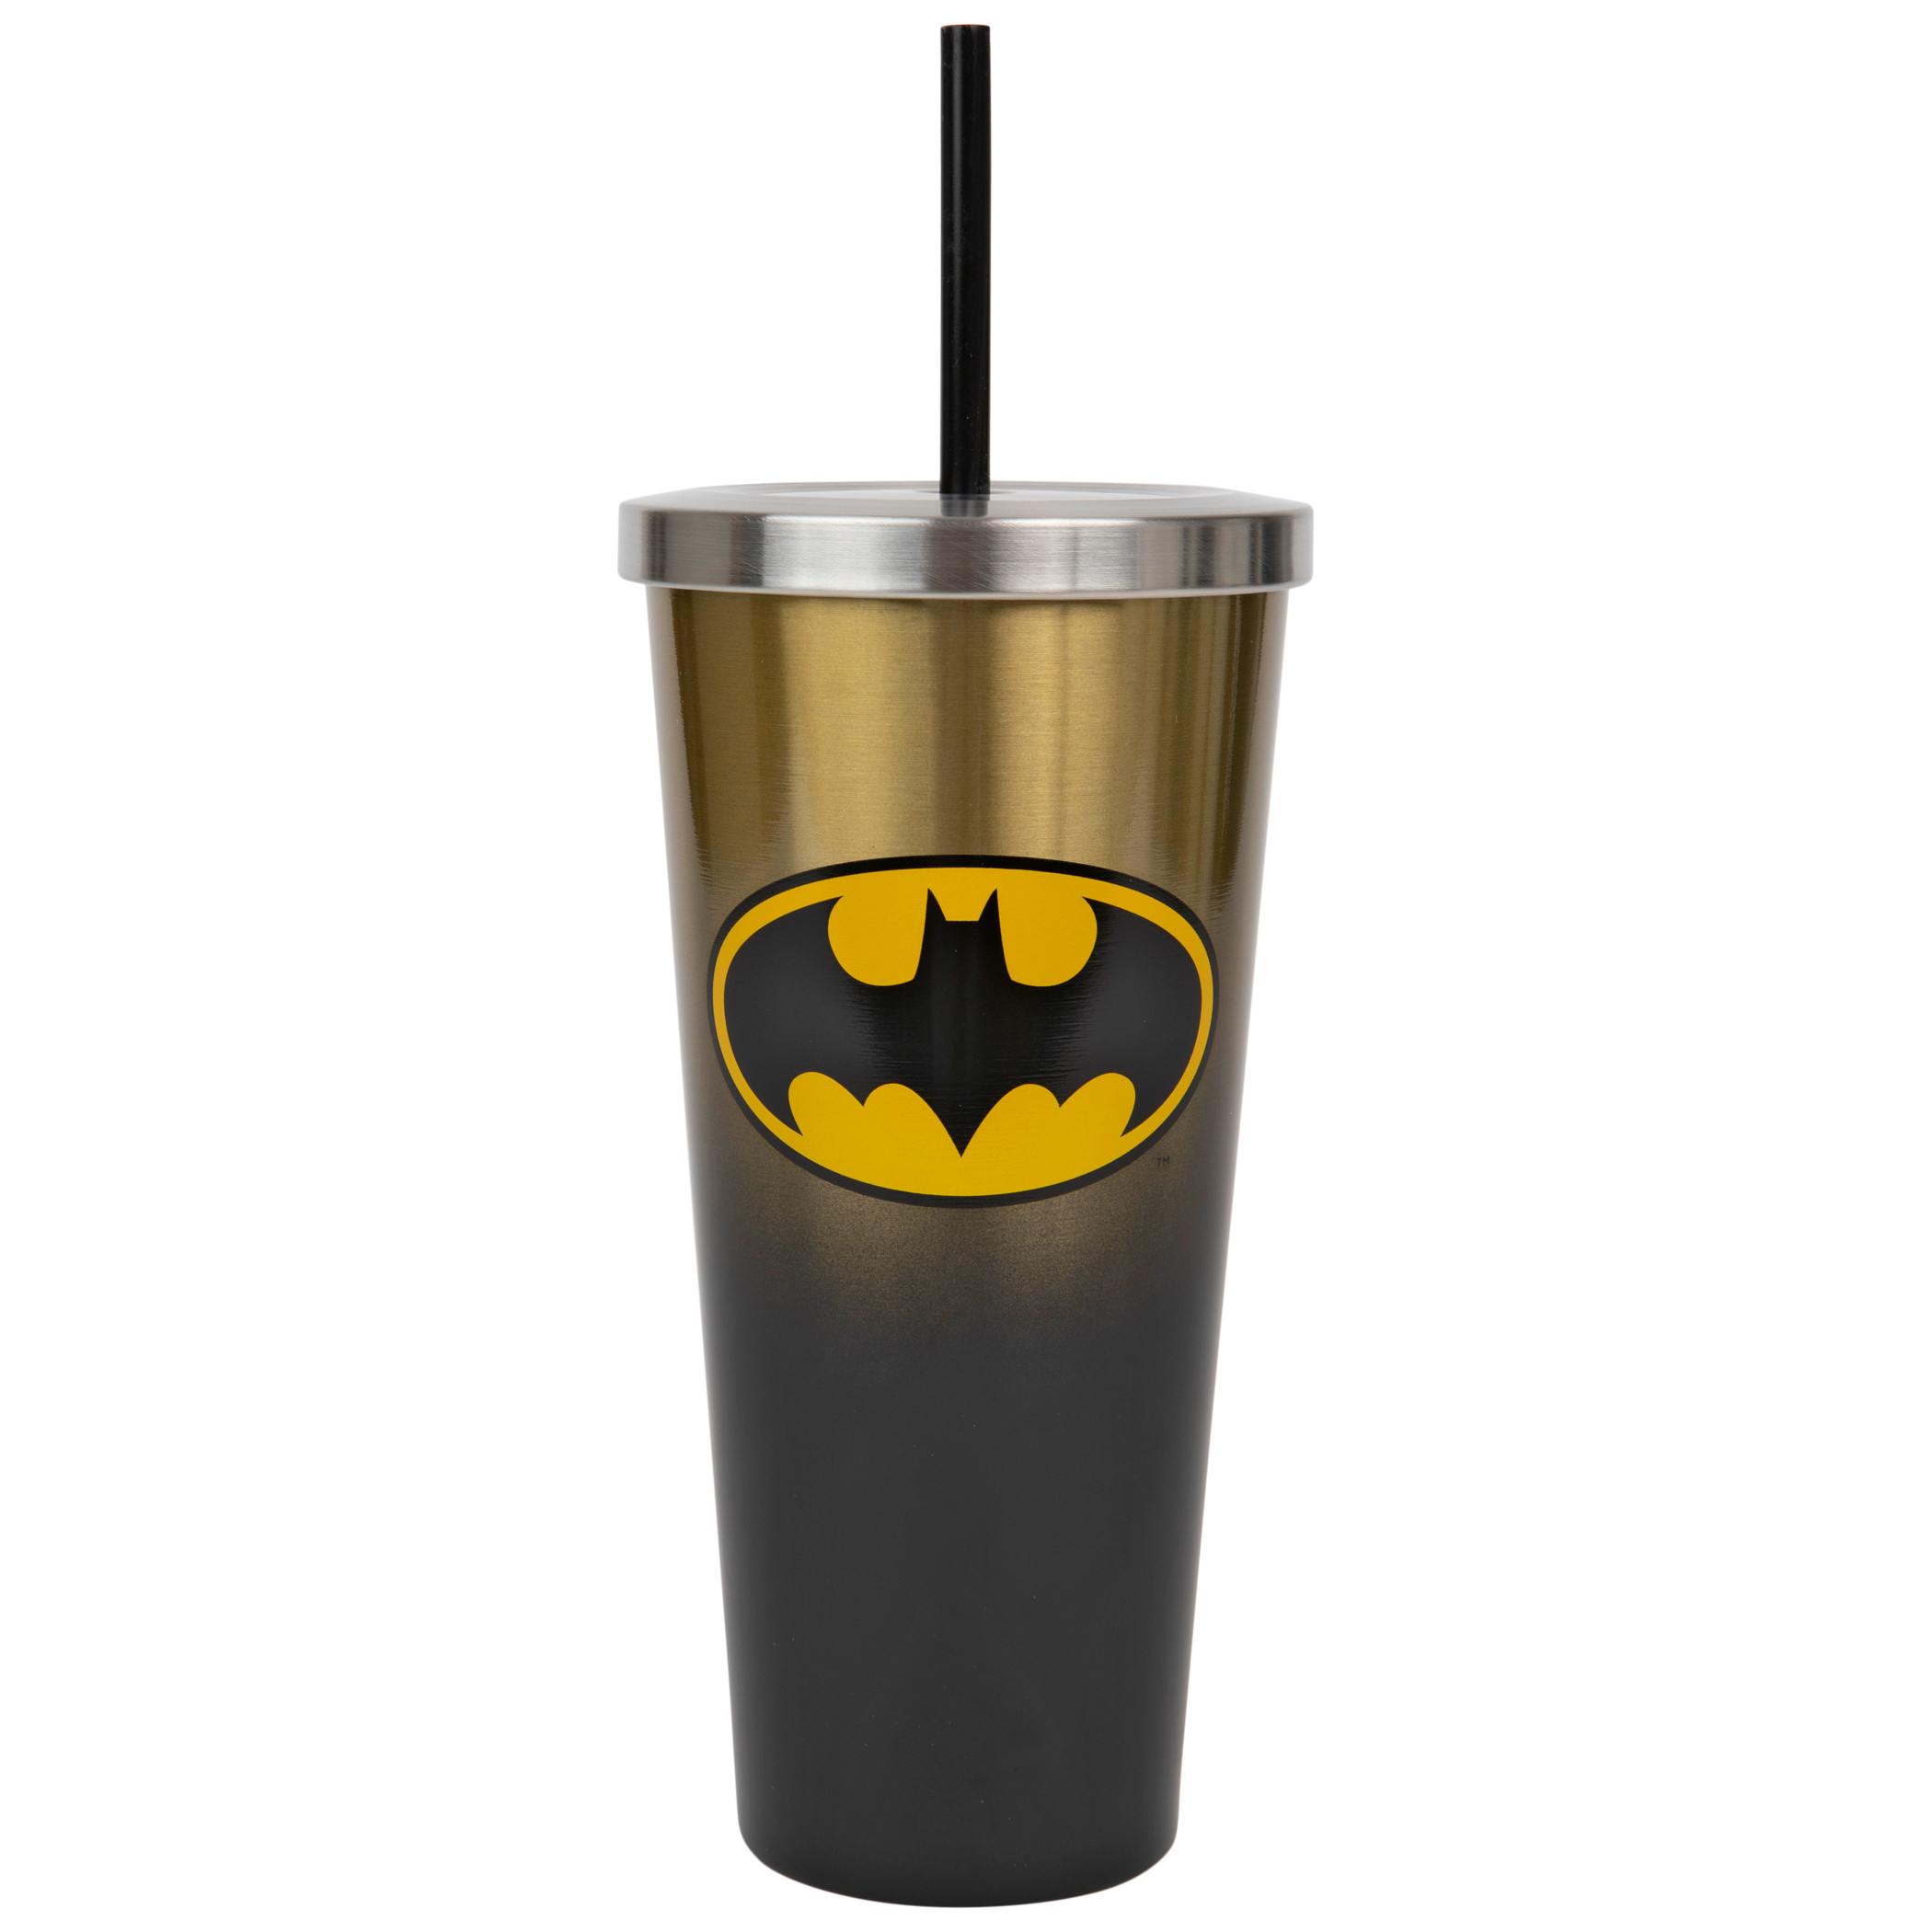 Batman Symbol Stainless Steel Travel Cup with Straw